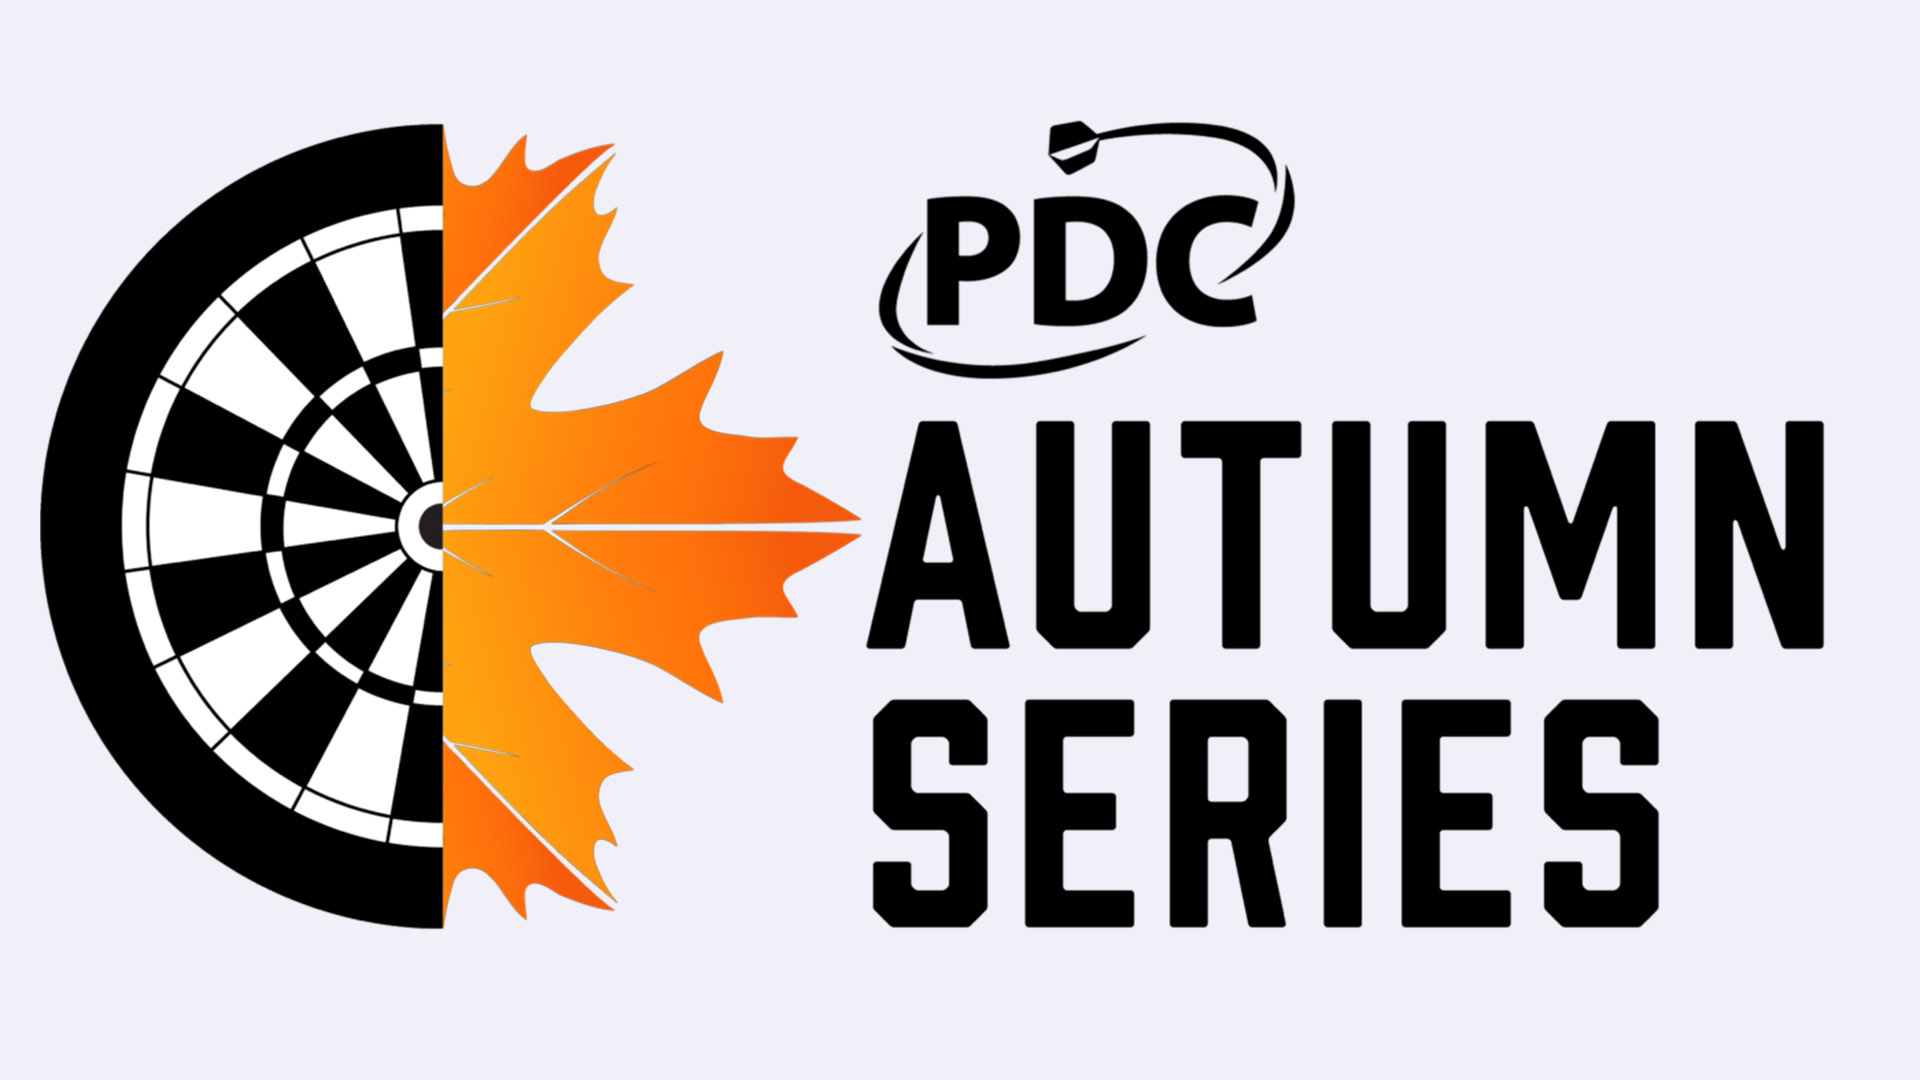 Entries for the PDC Autumn Series confirmed